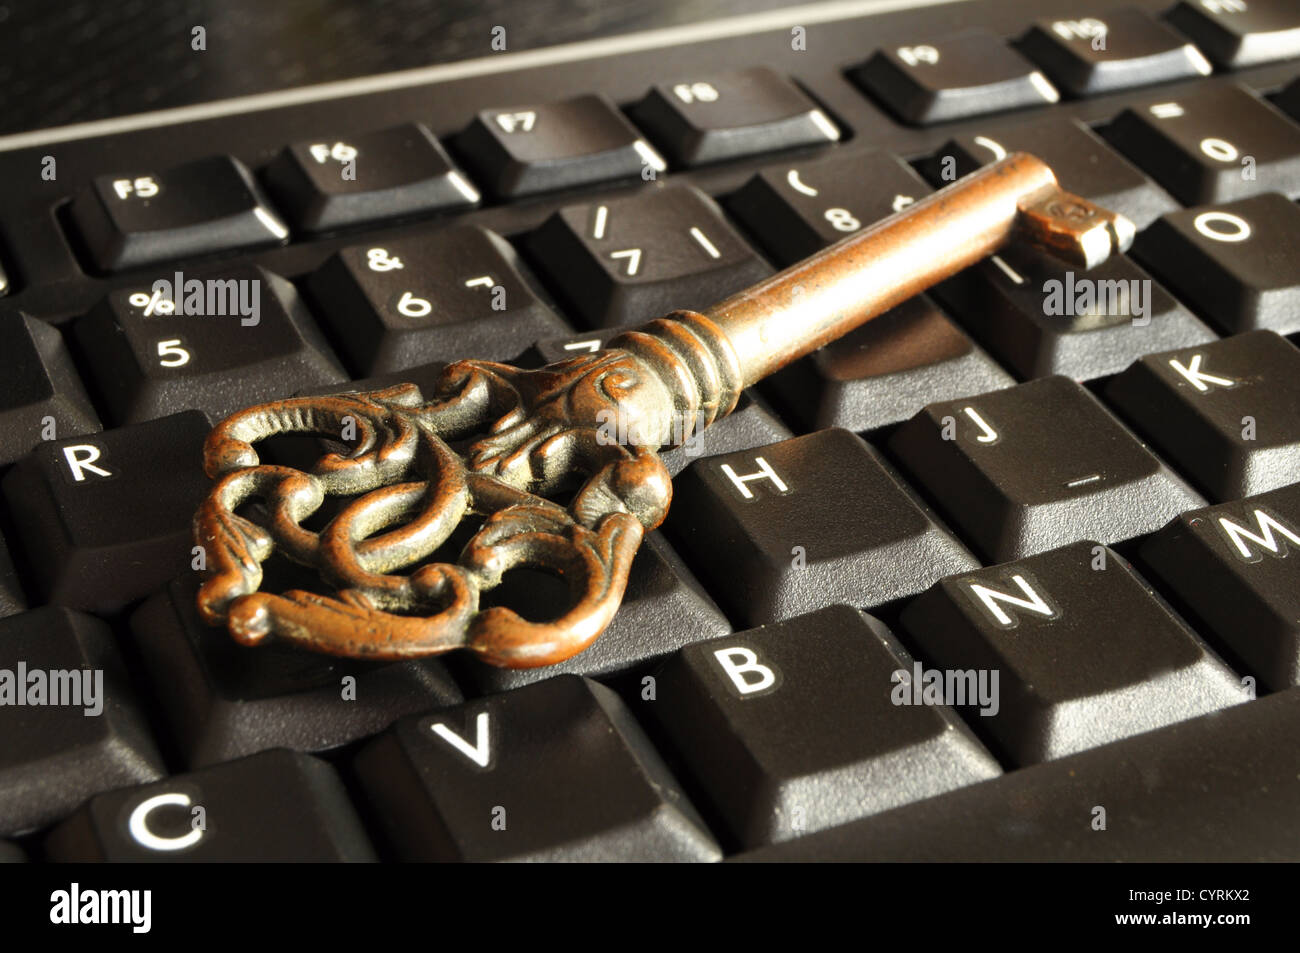 internet security concept with padlock on black keyboard Stock Photo